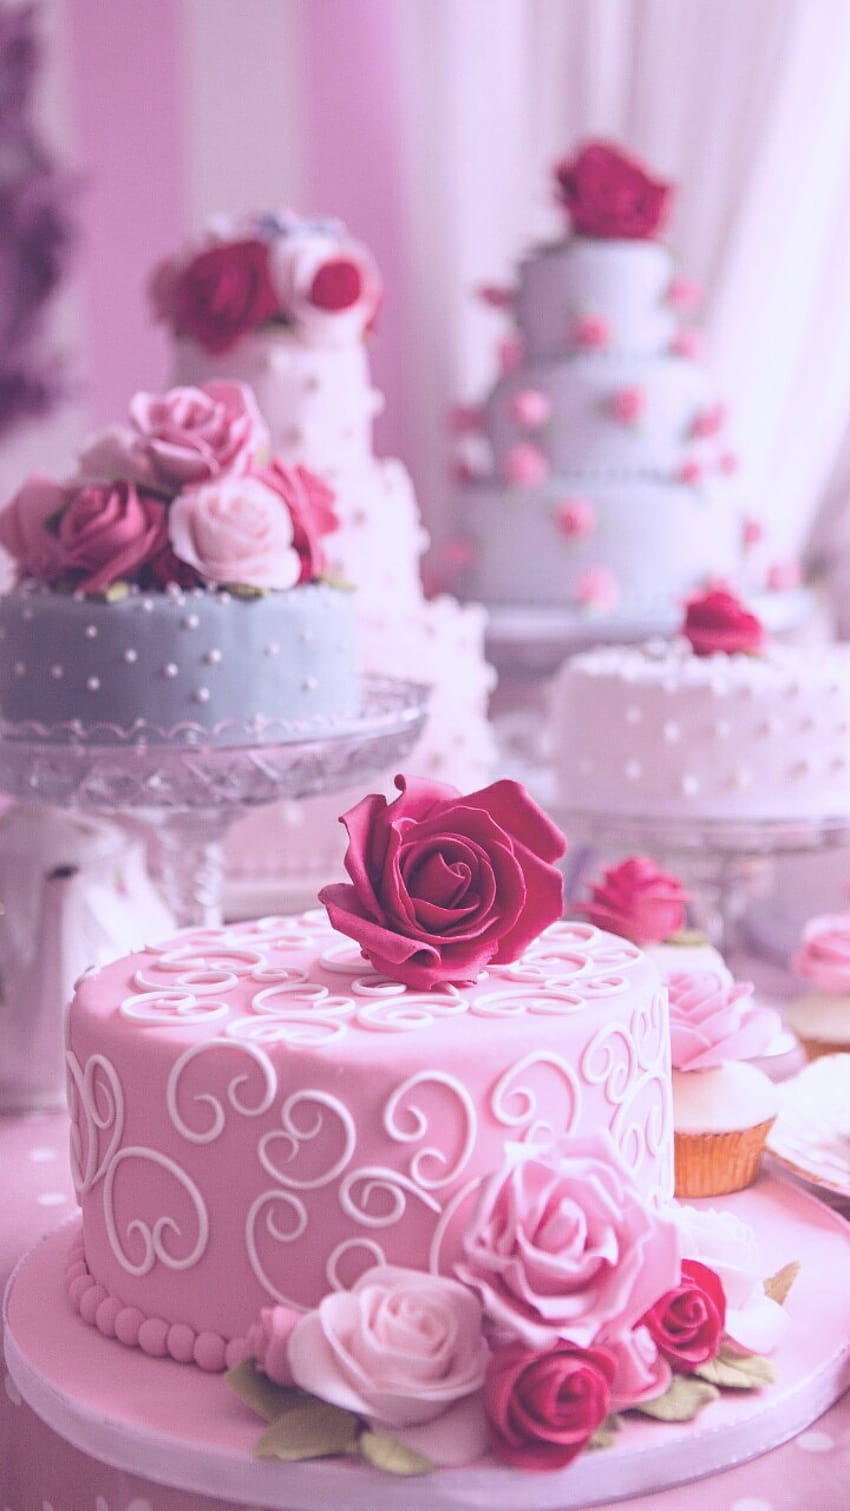 Pink cake,art, background, beautiful, beauty, cake, decor, decoration, delicious, design, dessert, flowers, food, pastel, roses, style, sugar, sweets, vintage, we heart it, pink background, pink cake, pastel pink, pastel color, beautiful HD phone wallpaper